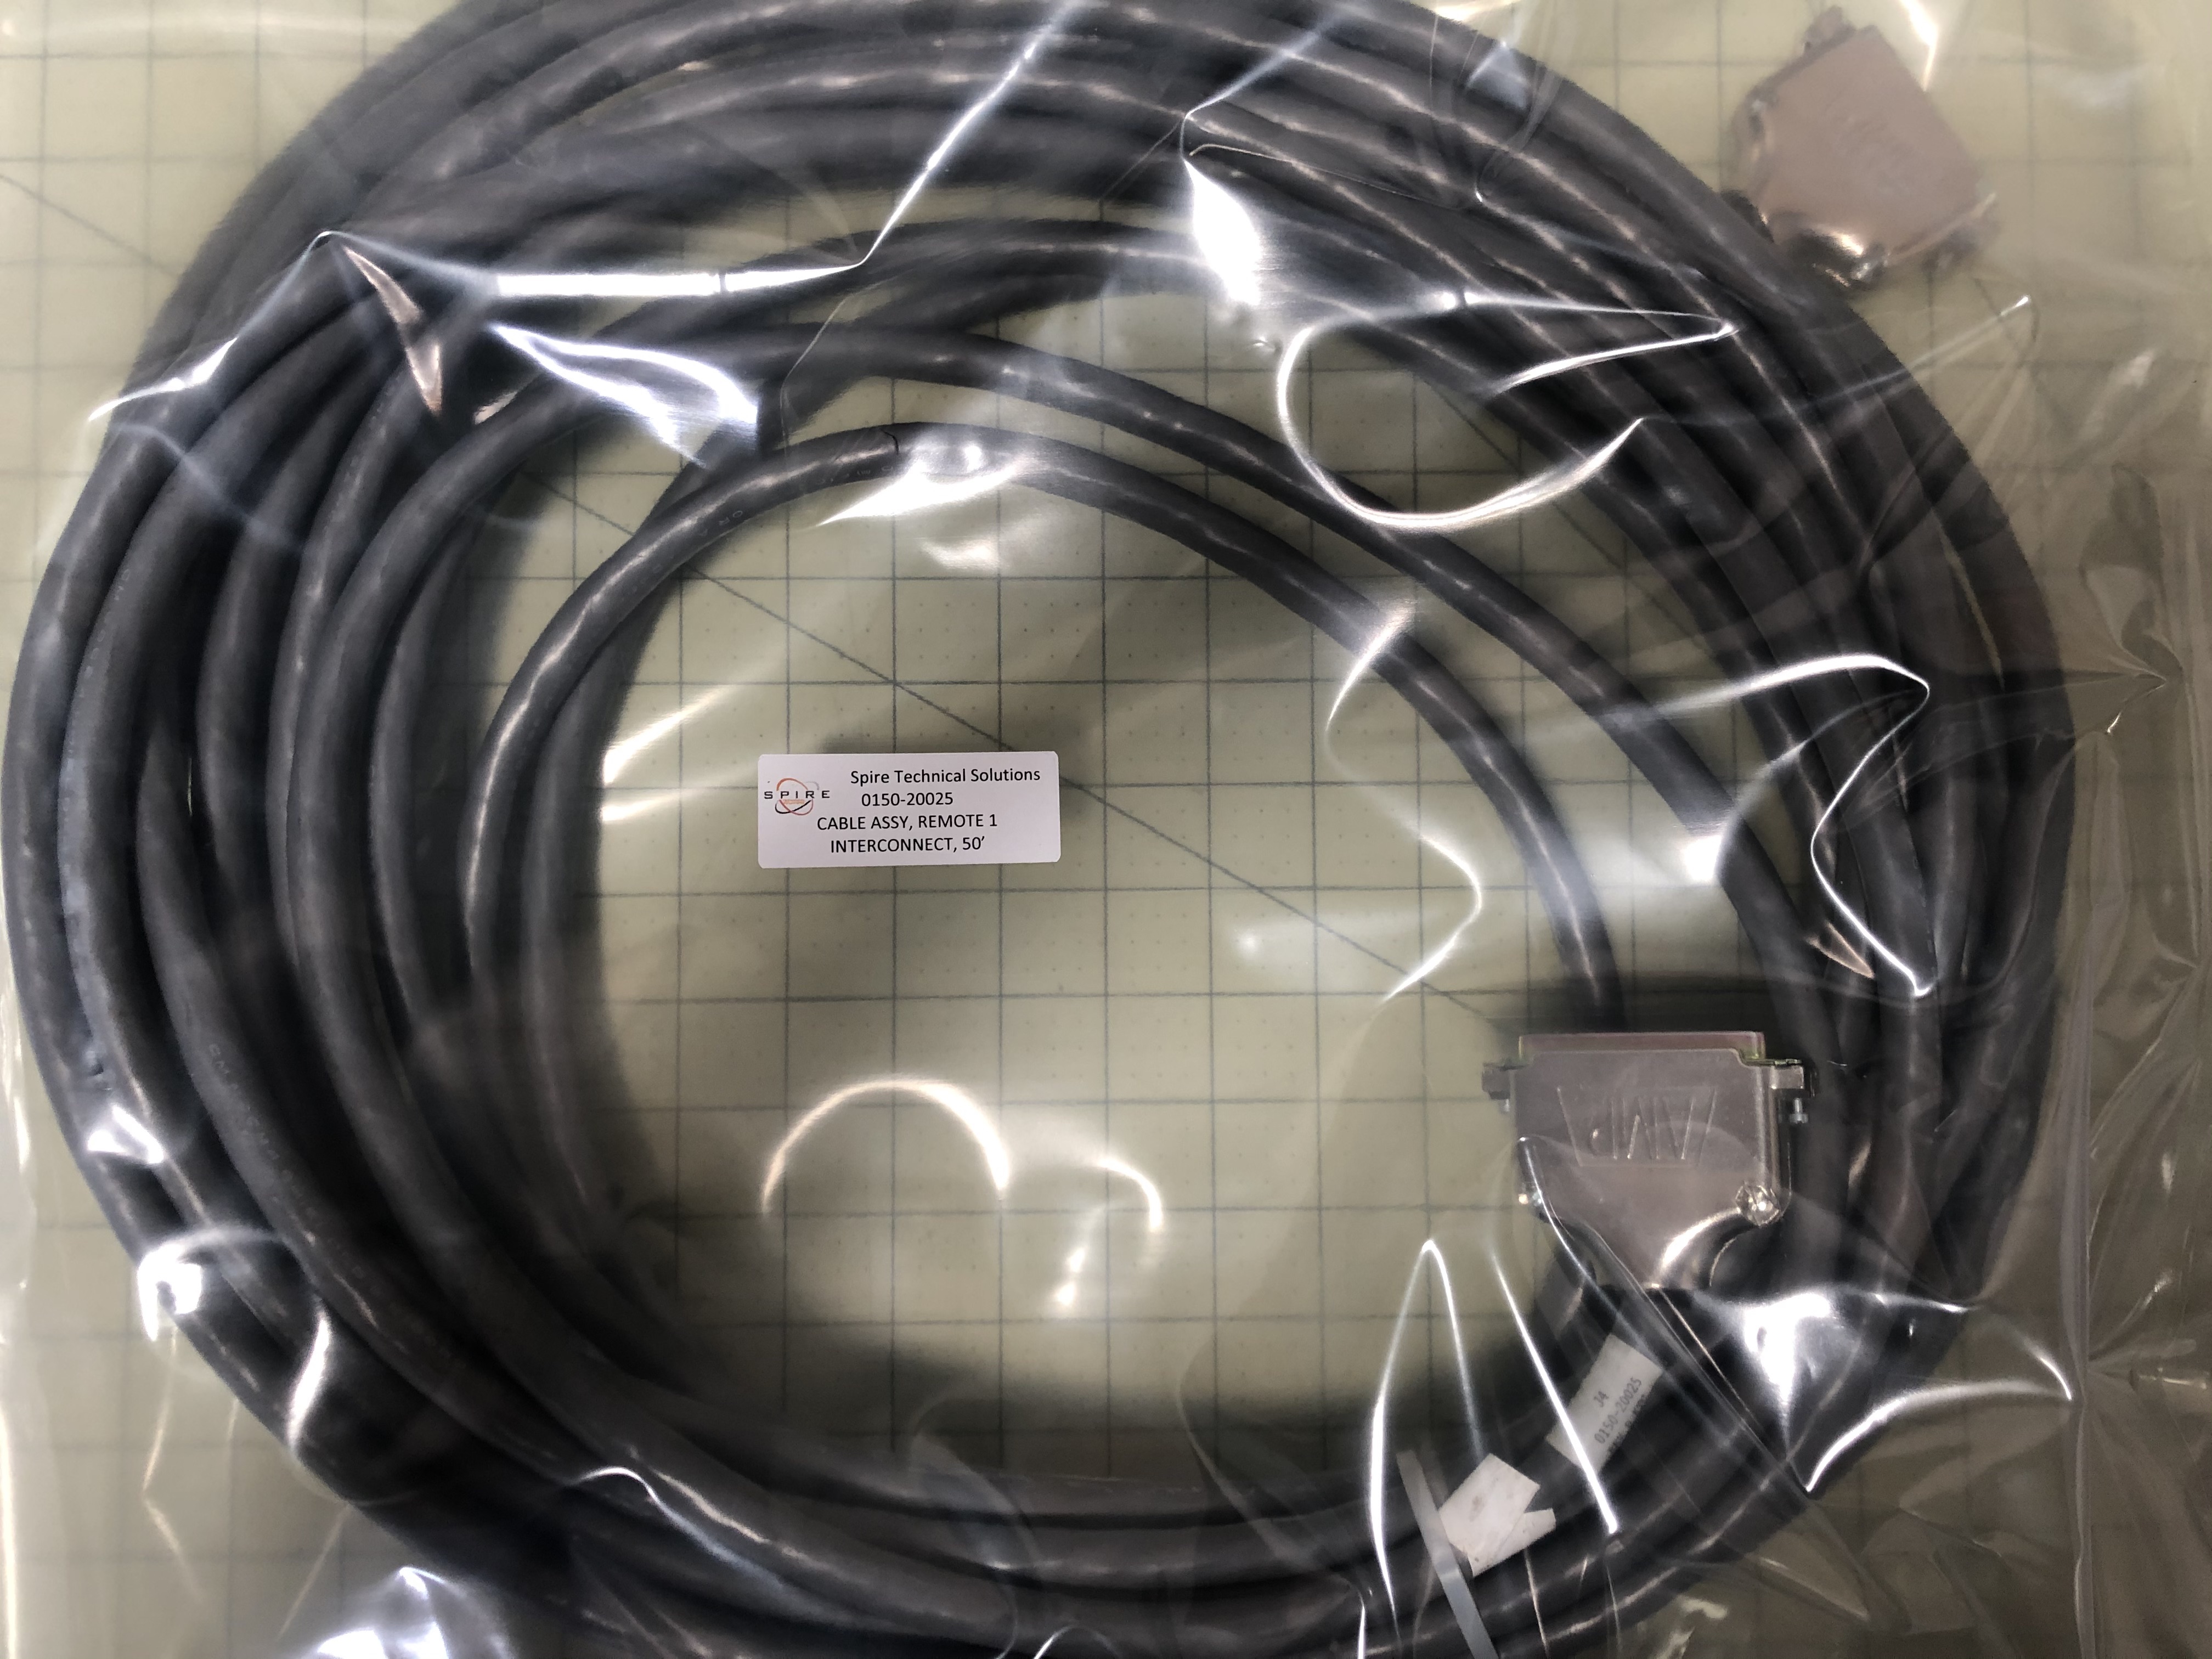 CABLE ASSY, REMOTE 1 INTERCONNECT, 50'